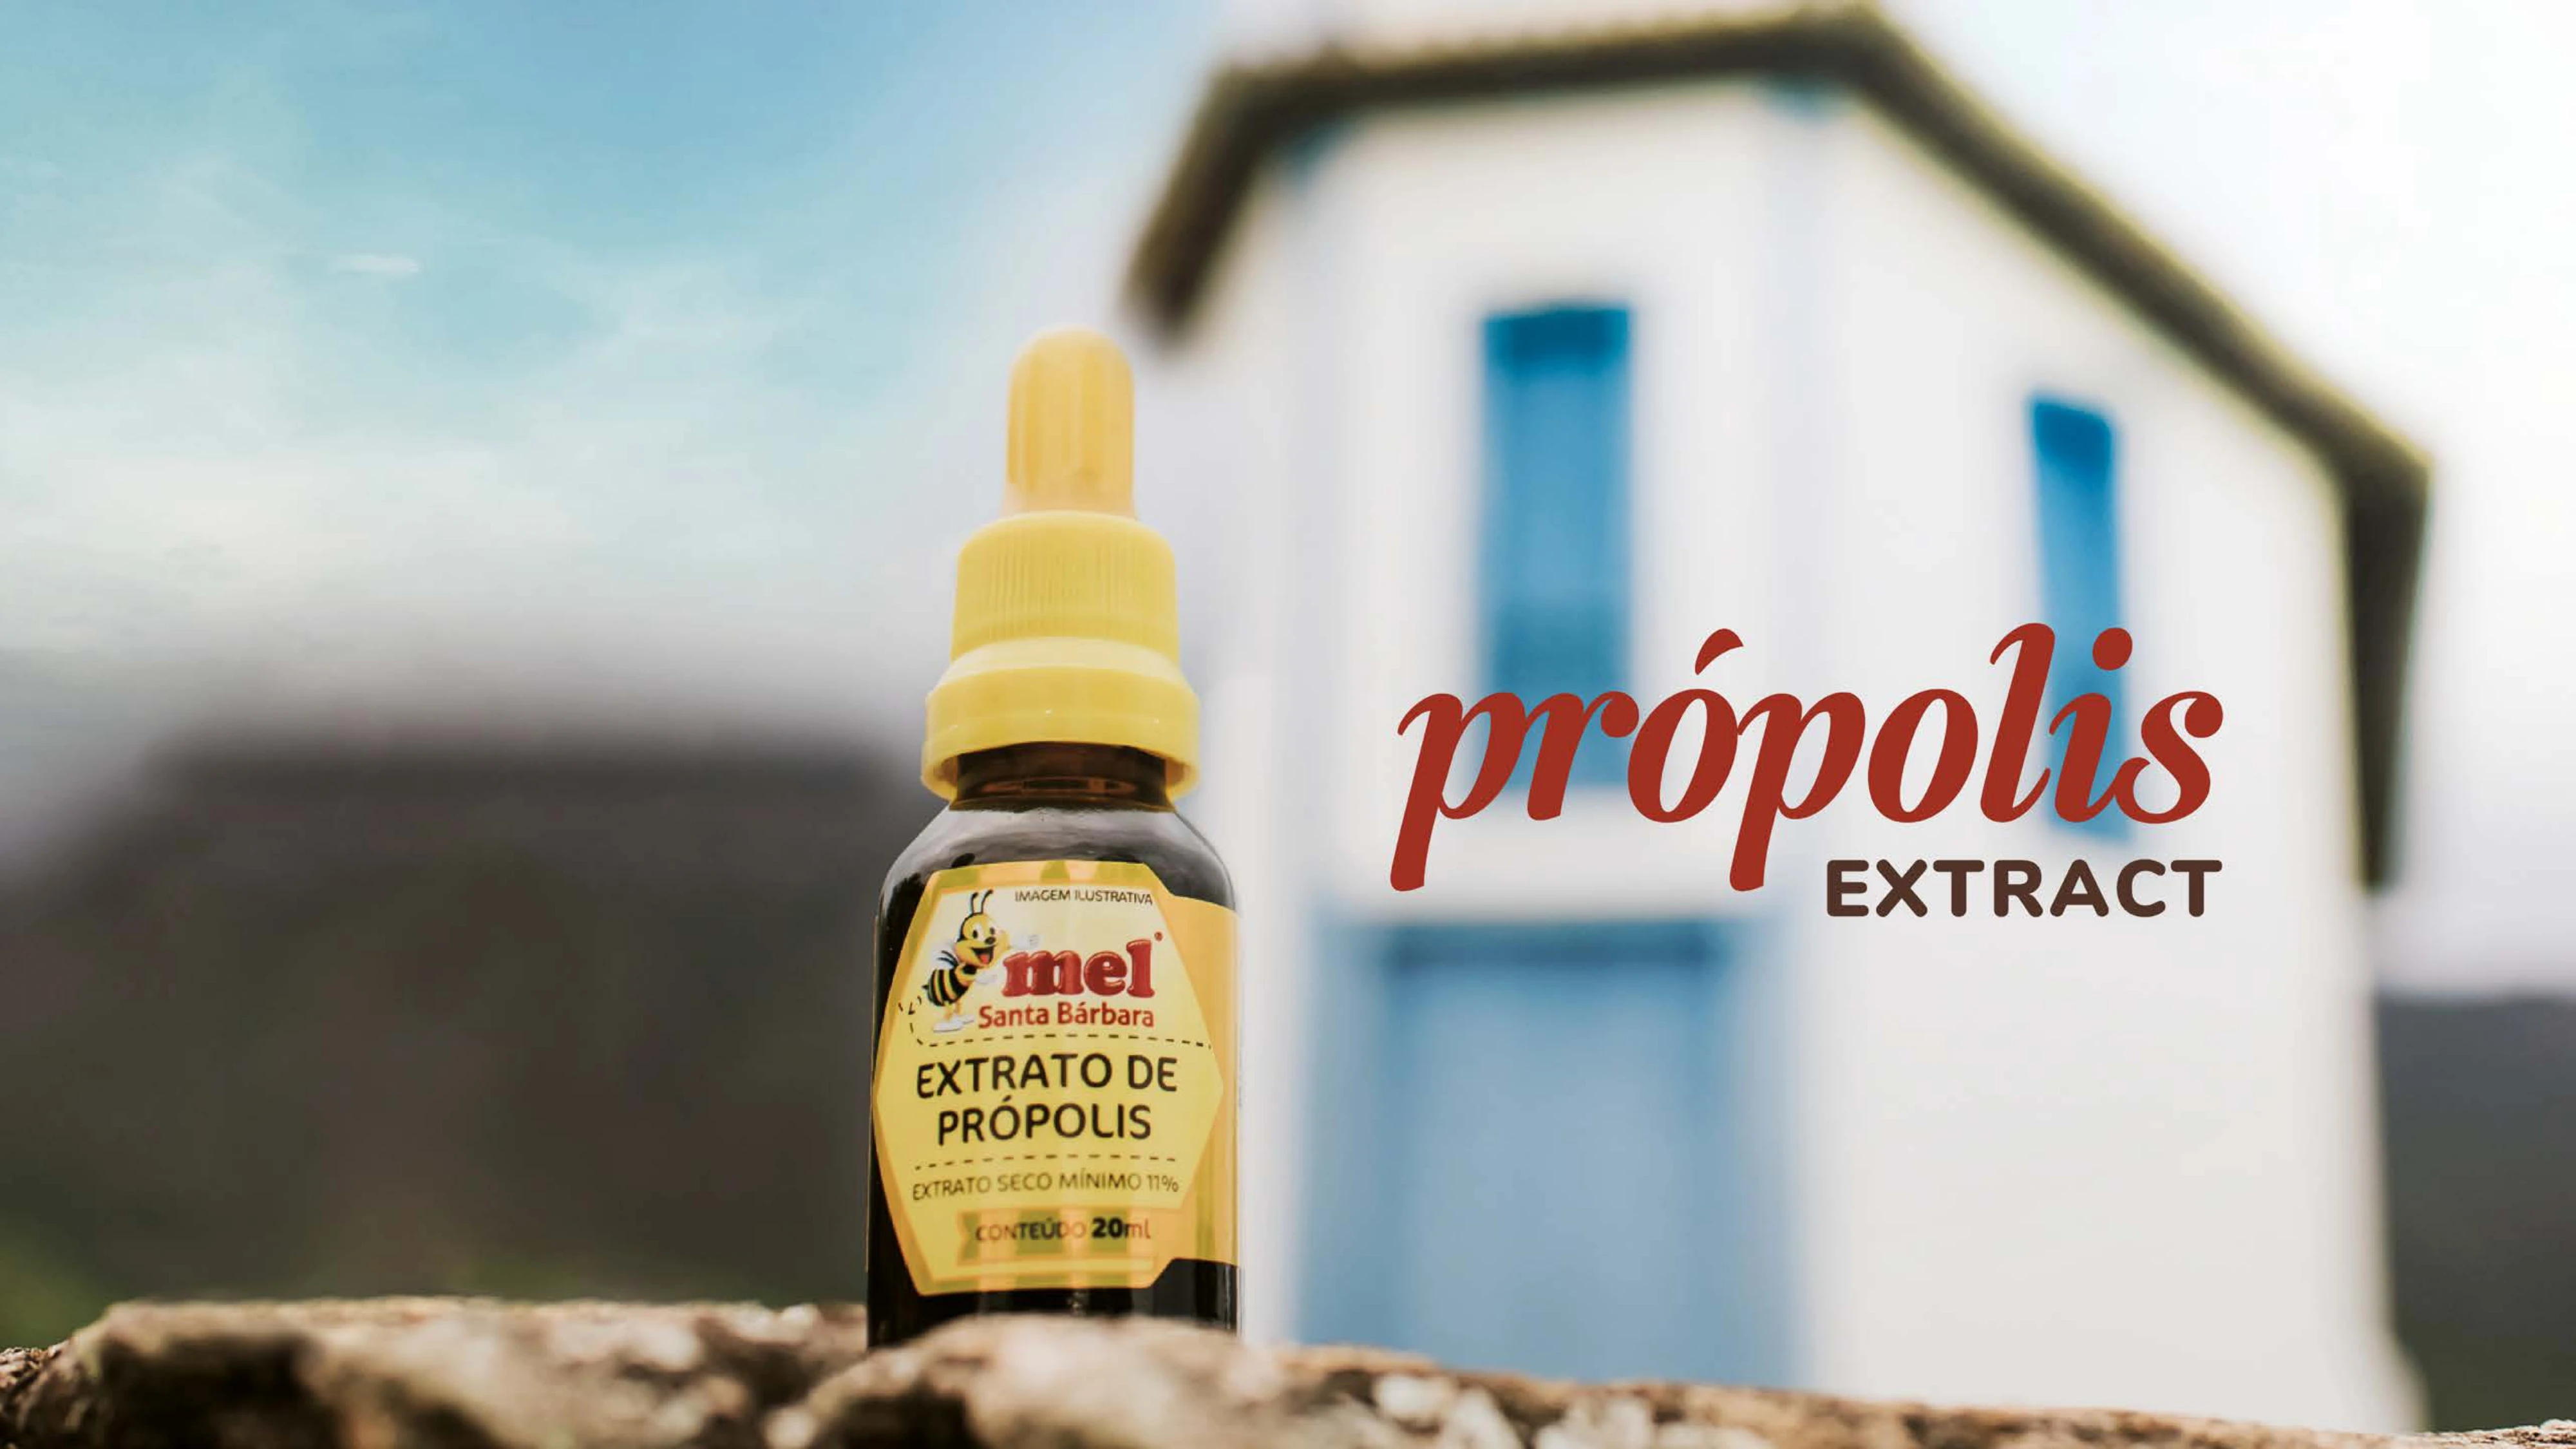 Flavored Ginger Pomegranate and Eucalyptus 35ml Honey Propolis Spray Healthy Bee Propolis Spray from Brazil